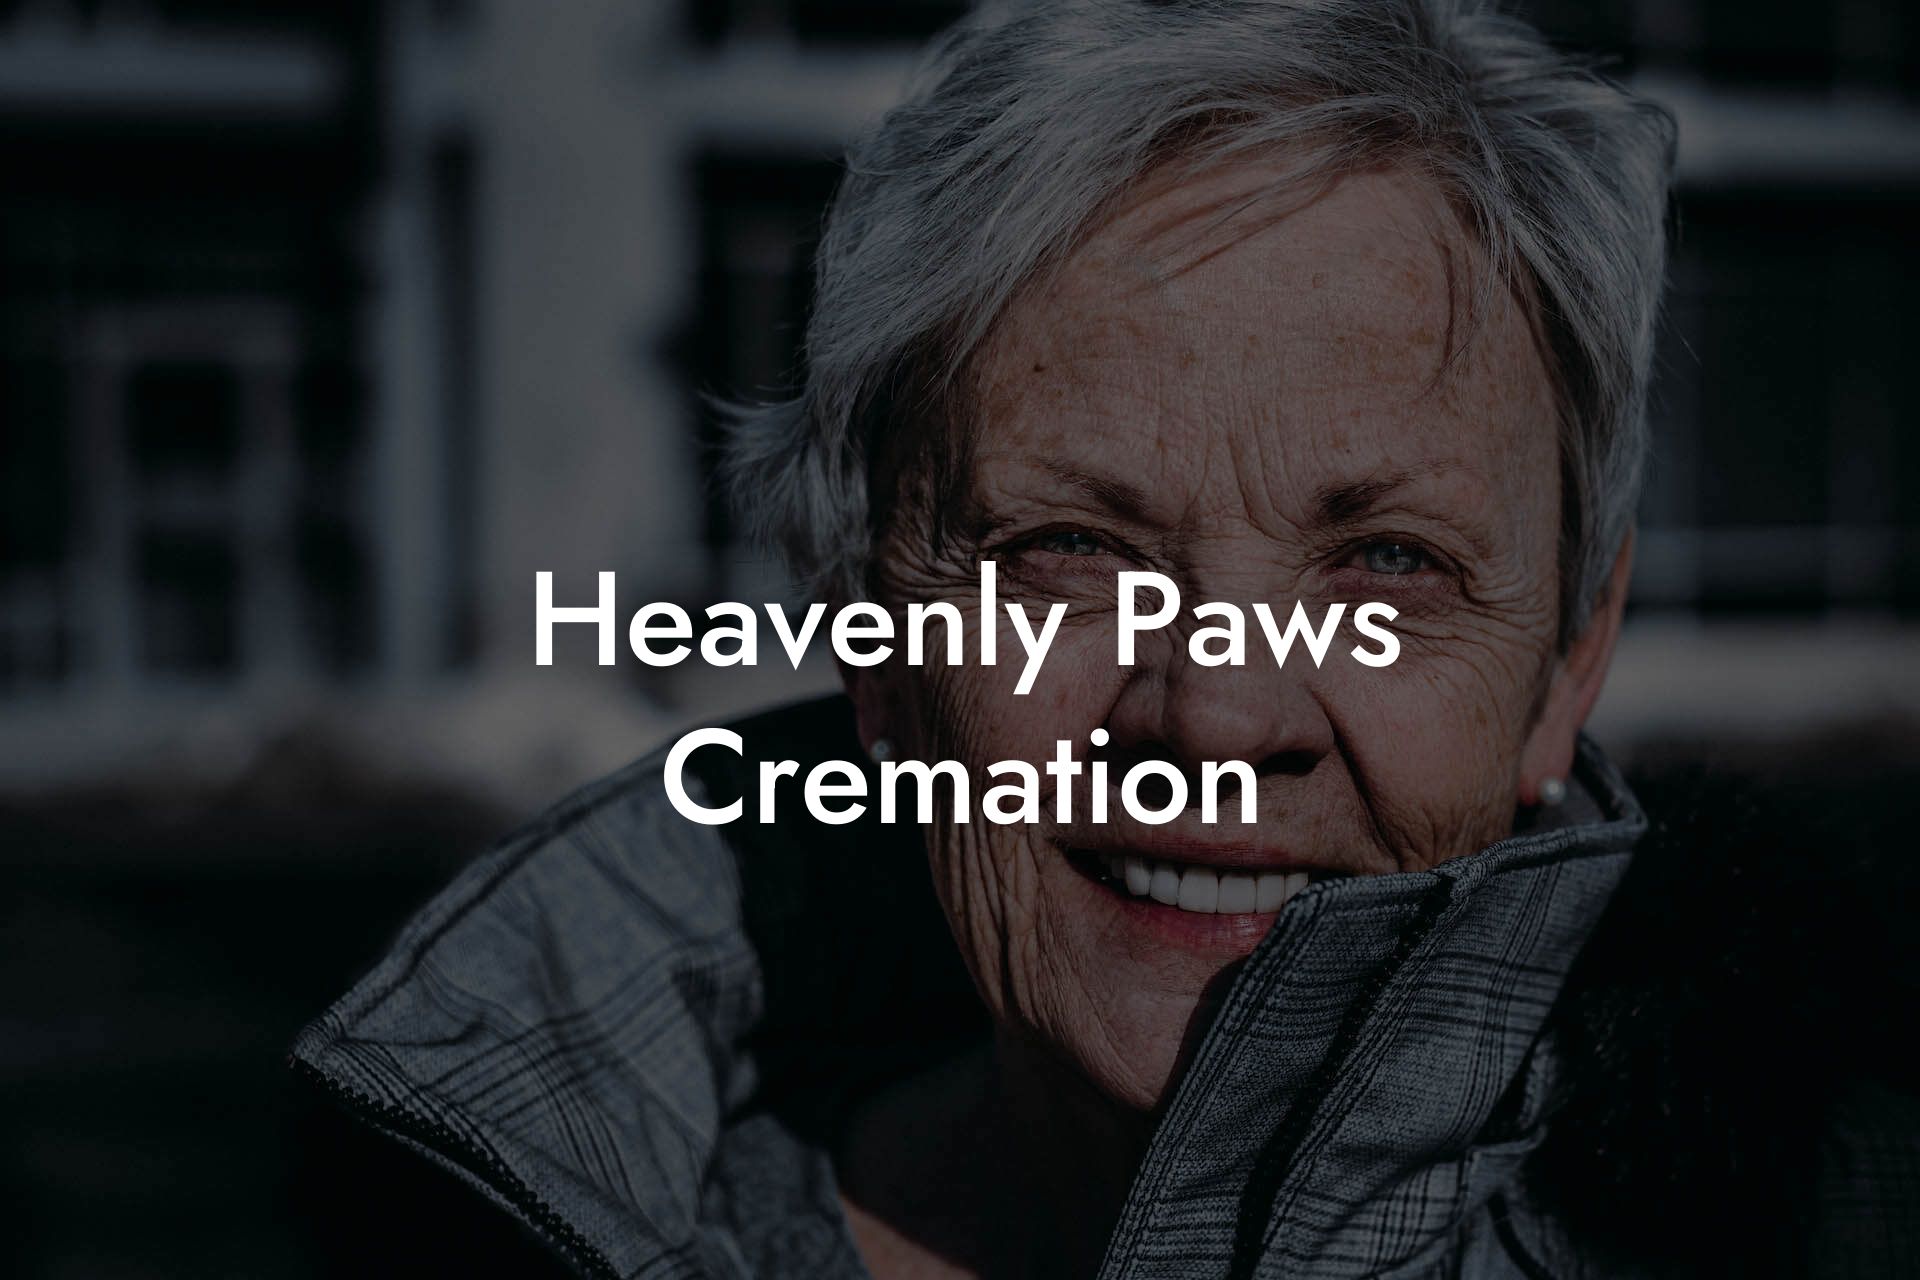 Heavenly Paws Cremation